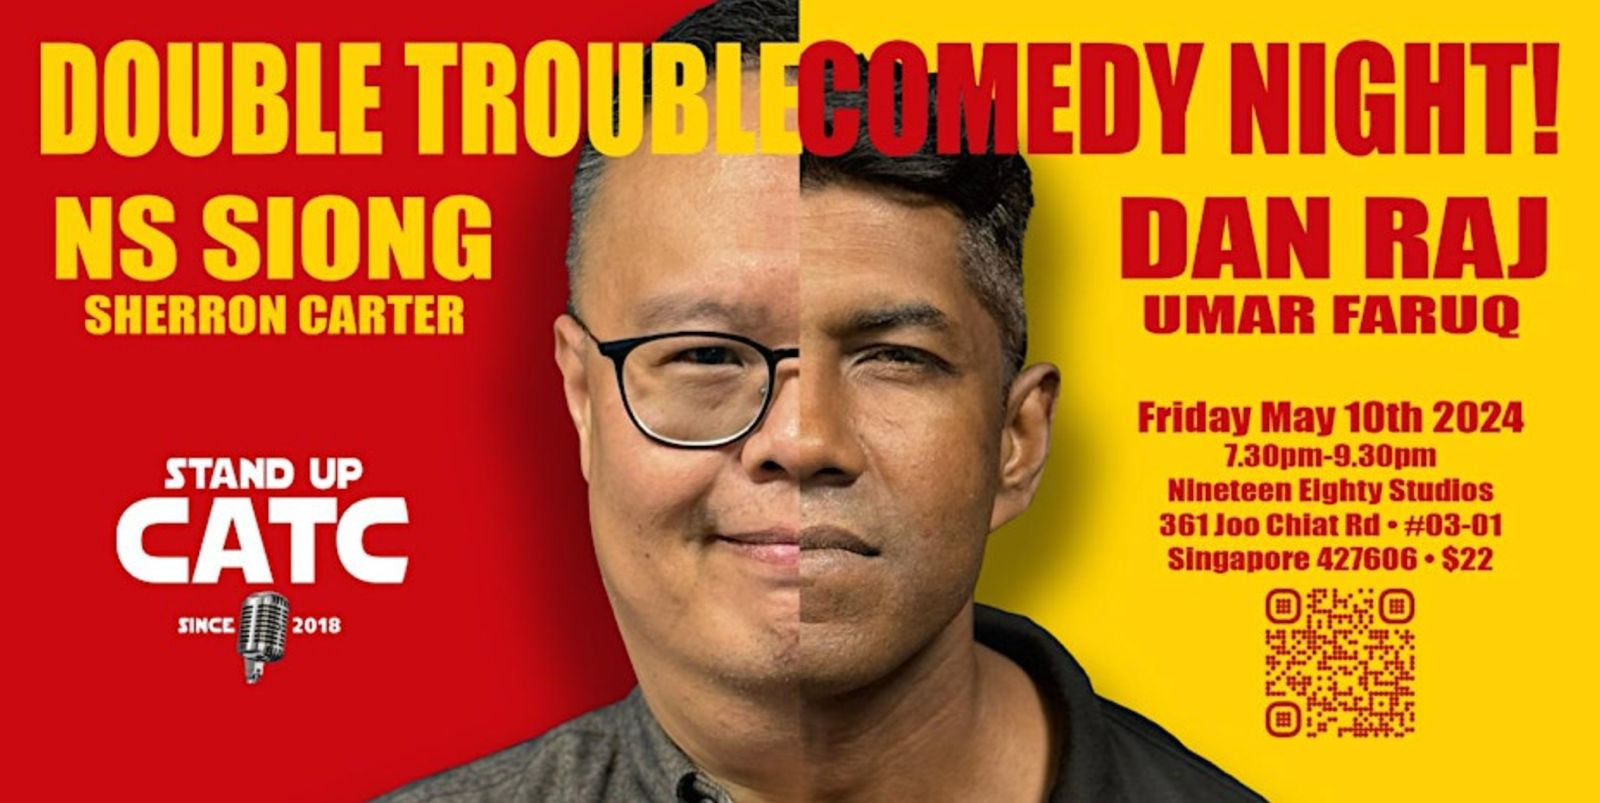 DOUBLE TROUBLE COMEDY NIGHT!